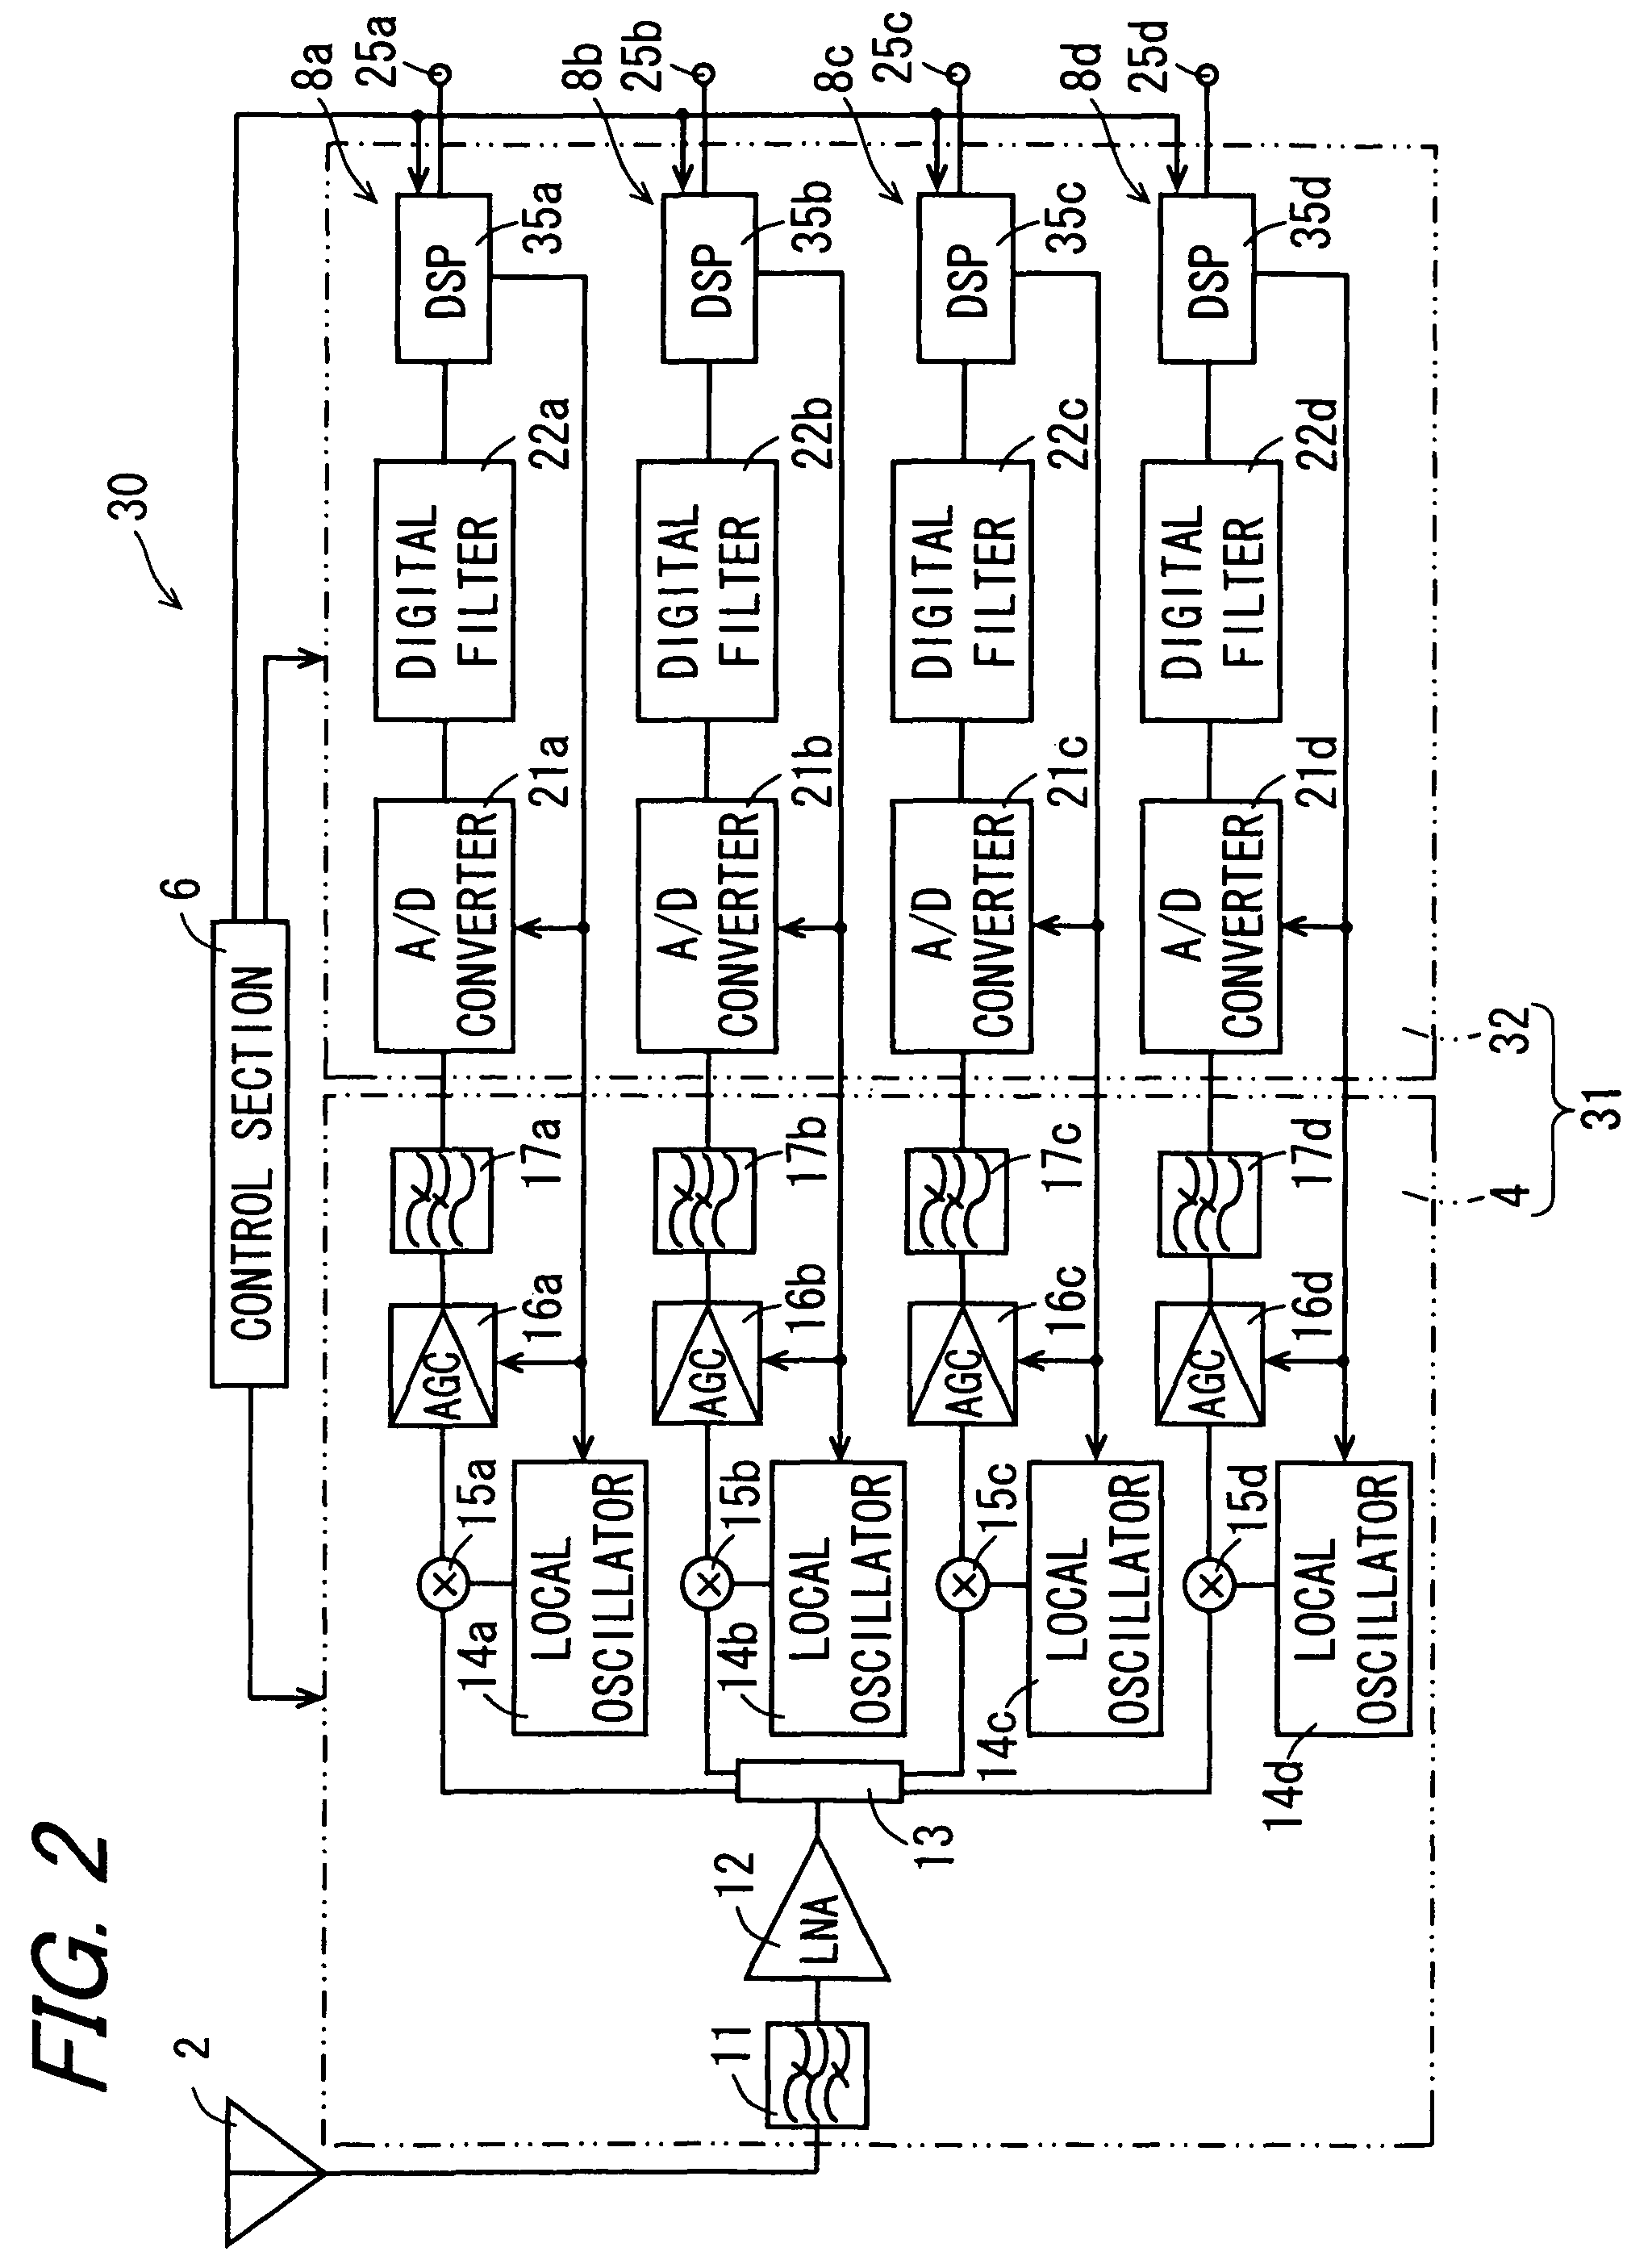 Receiver apparatus and information recording/outputting apparatus